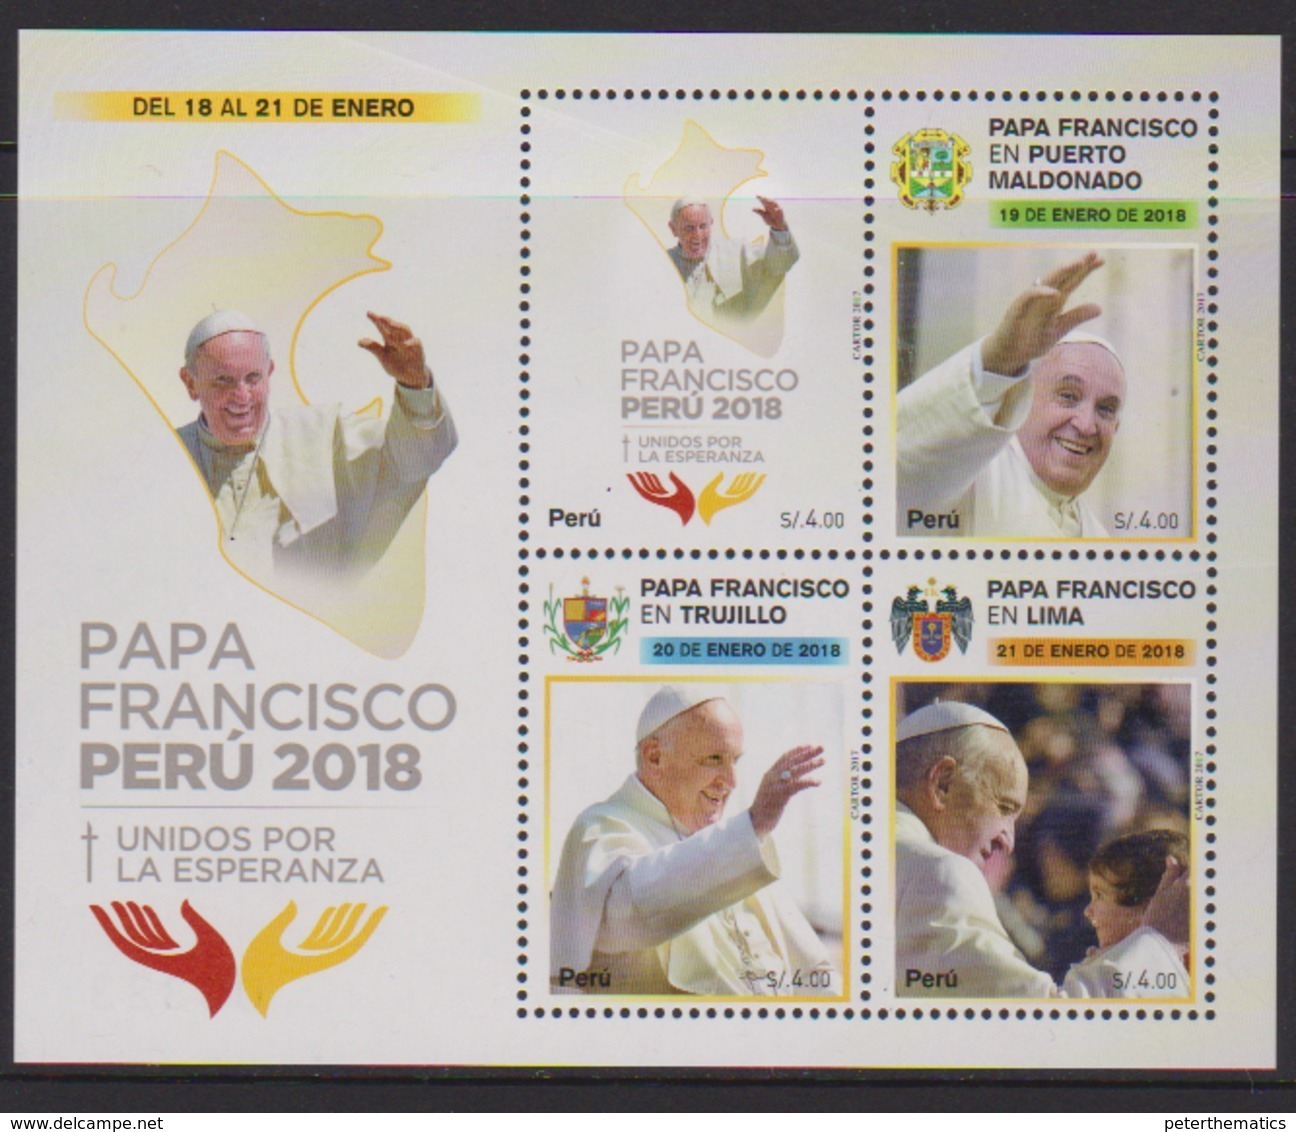 PERU, 2017, MNH, POPES, POPE FRANCIS, POPE VISIT TO PERU,  S/SHEET - Popes